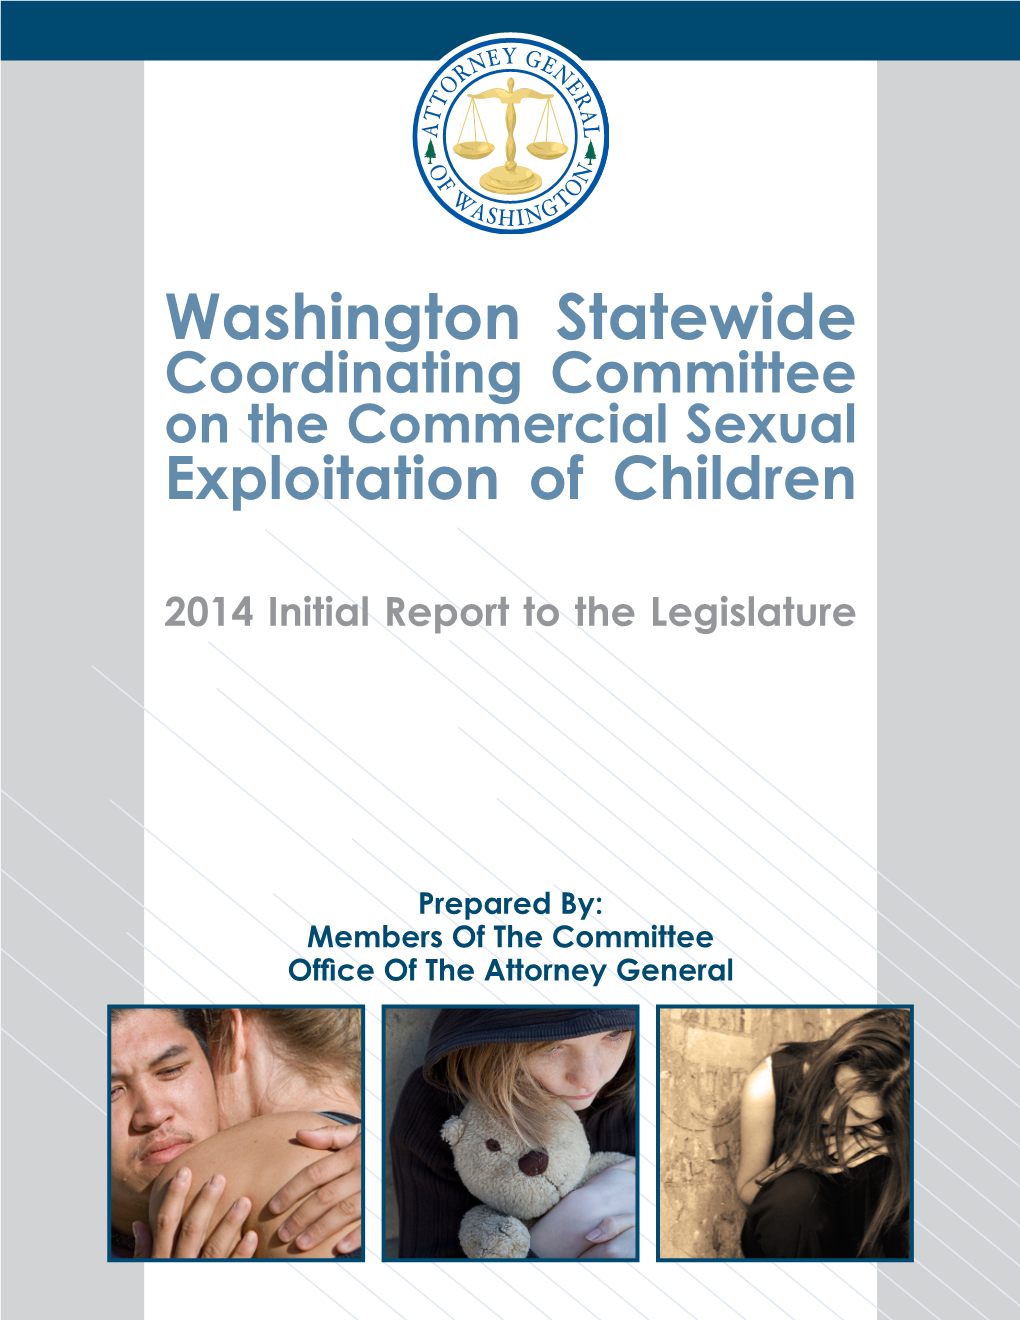 Washington Statewide Coordinating Committee on the Commercial Sexual Exploitation of Children